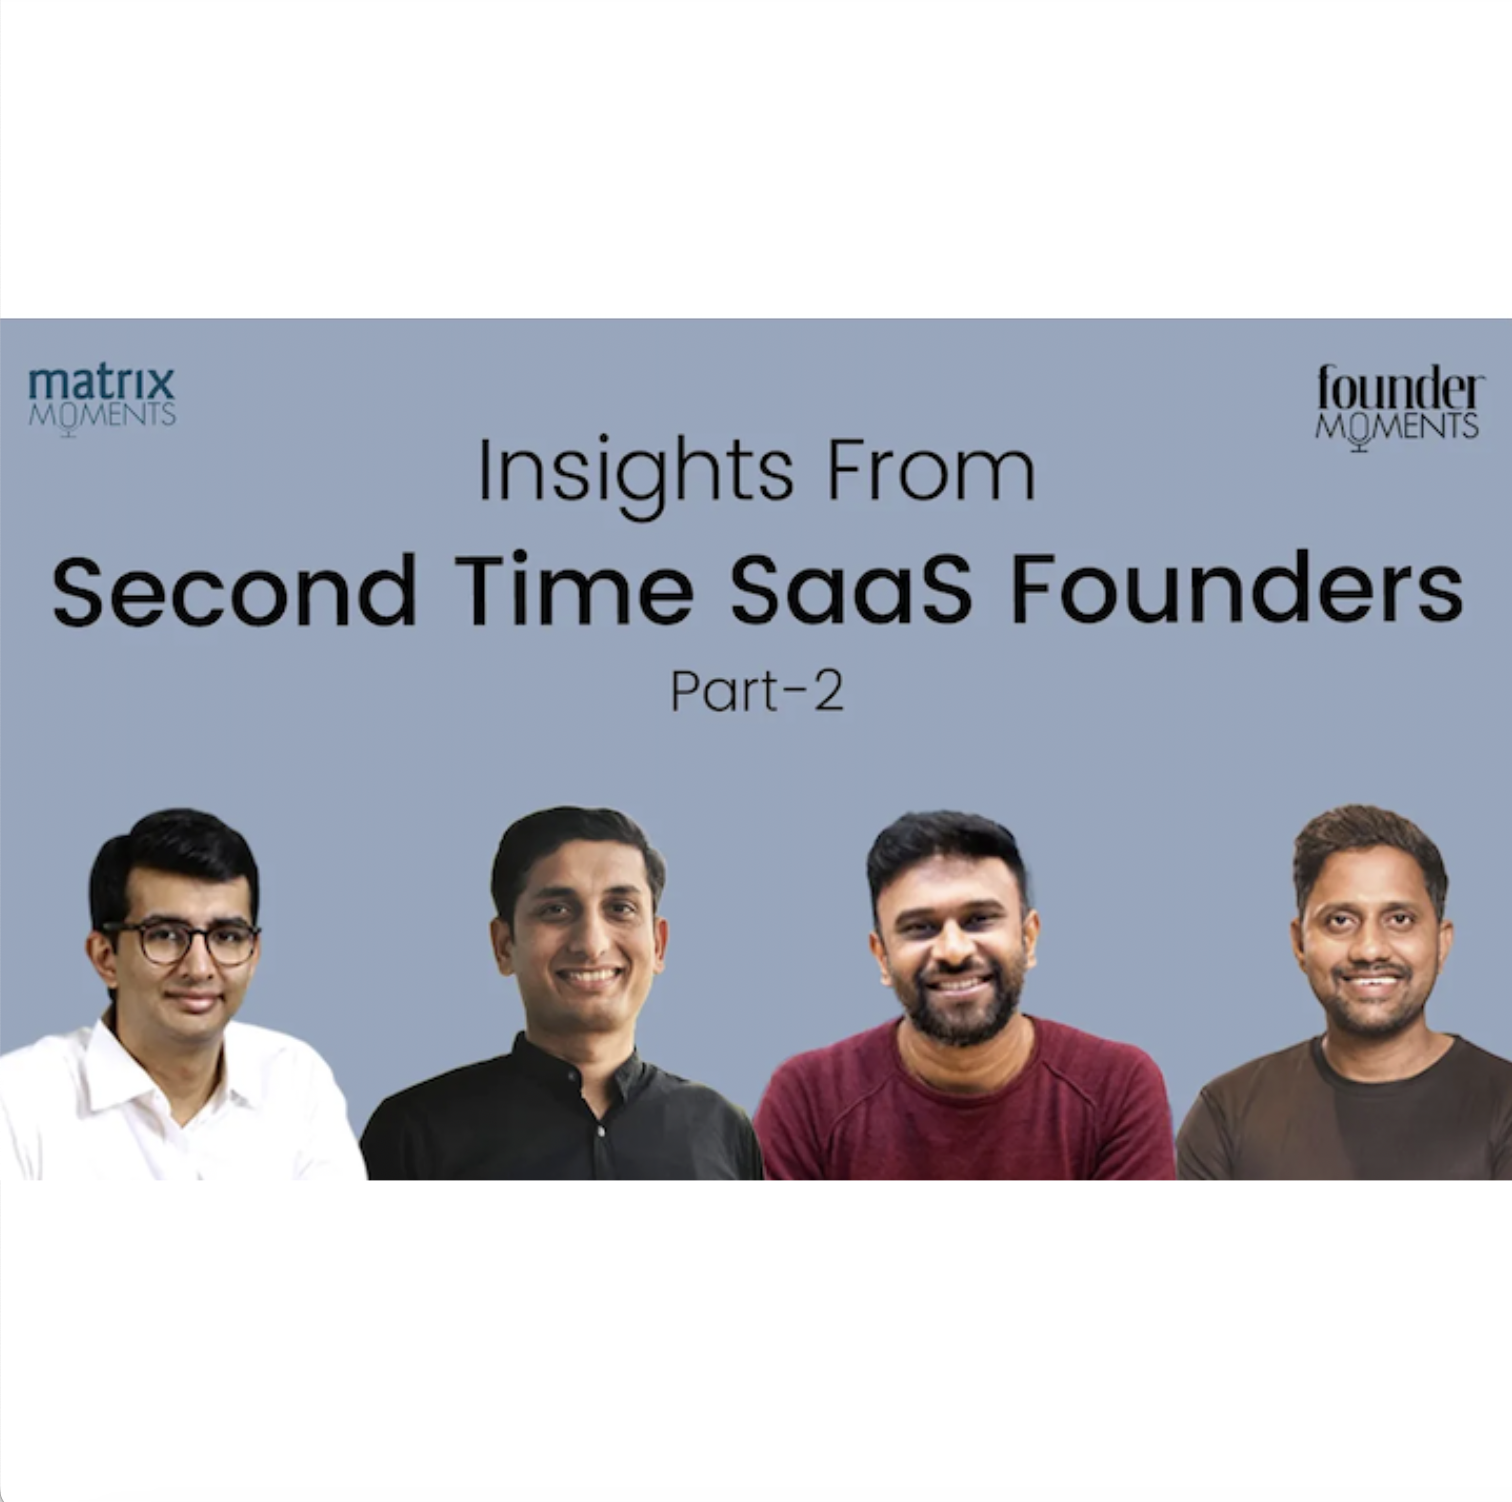 177: Matrix Moments: Insights From Second Time SaaS Founders - Part 2